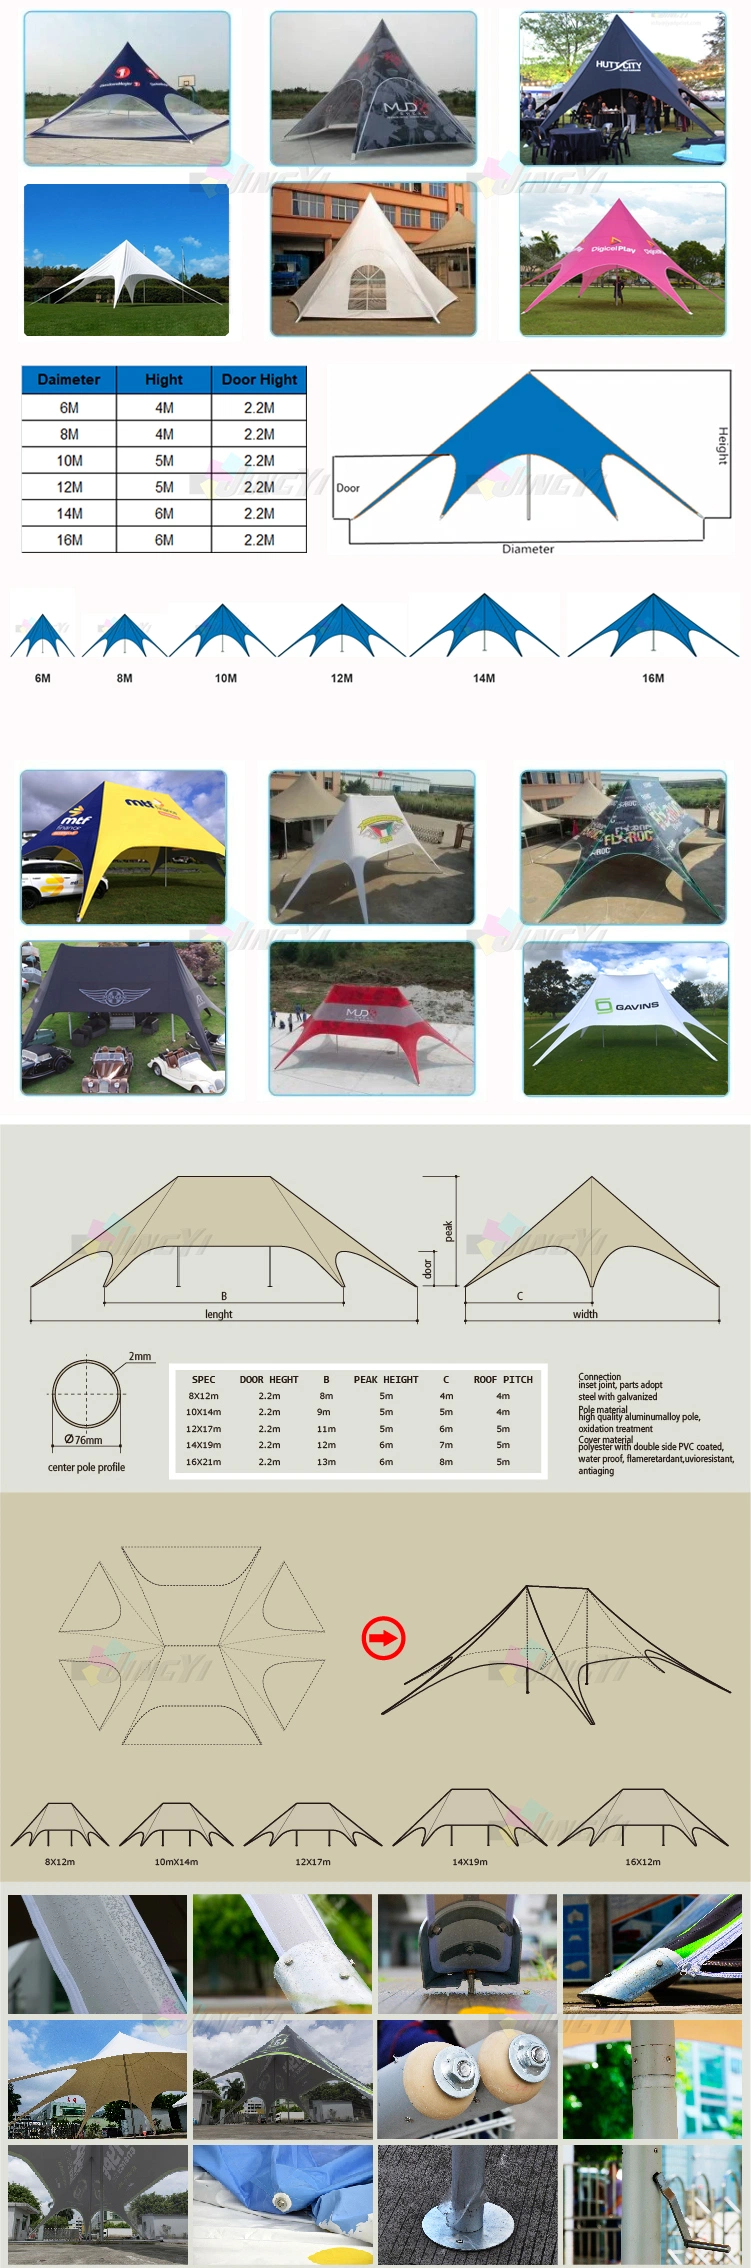 Advertising Aluminum Pole Oxford Fabric with CMYK Full Color Print Outdoor Event Tent, Wedding Star Display Canopy Marquee Shade Gazebo Party Protable Tent